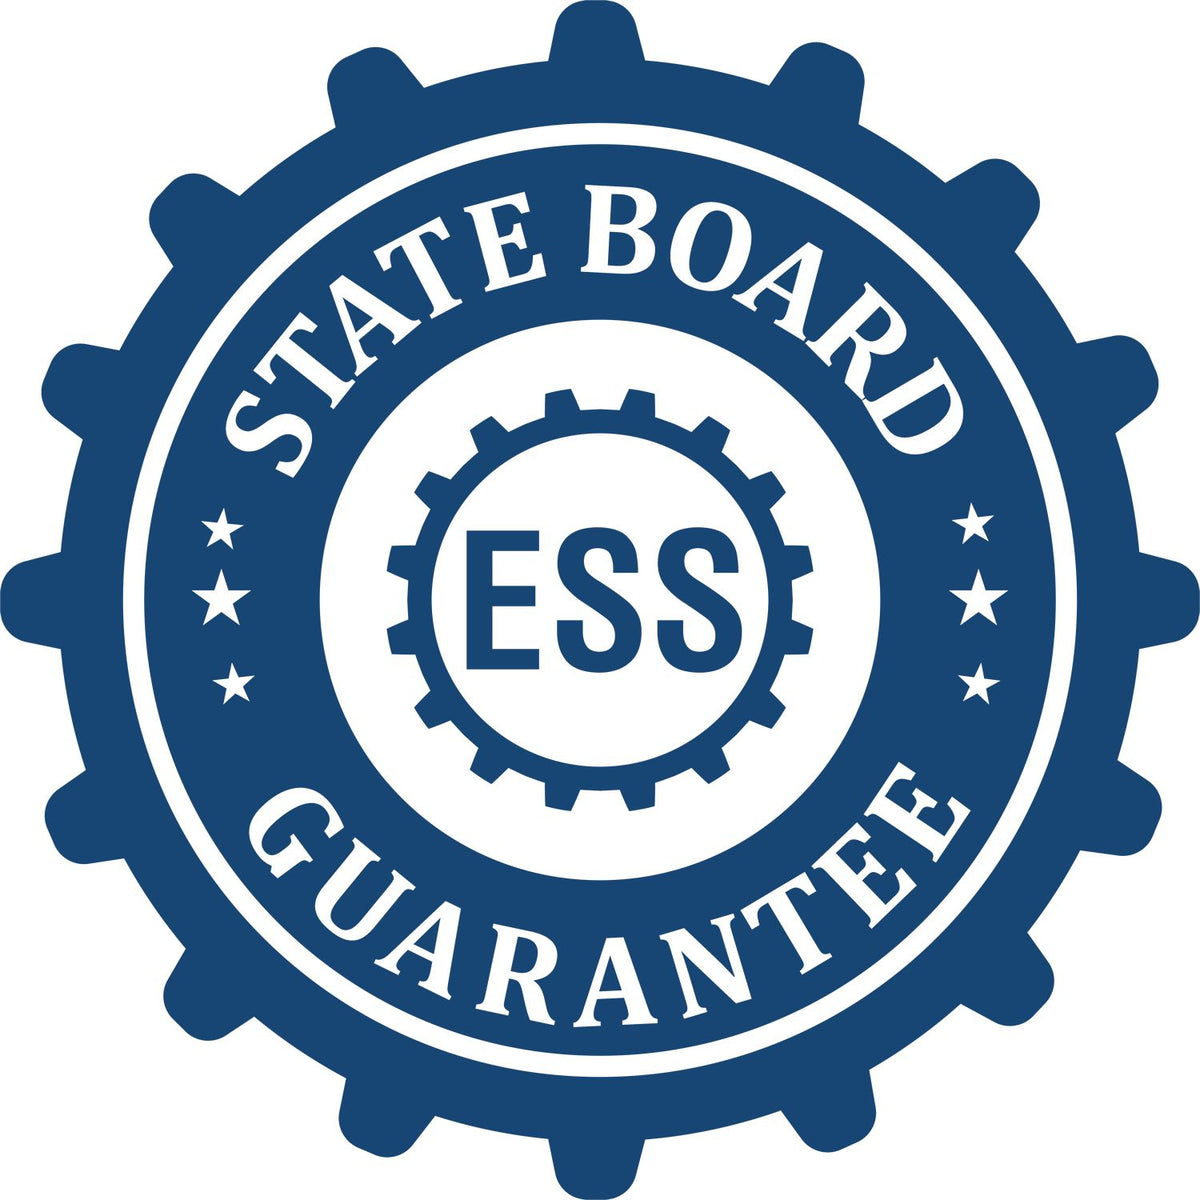 An emblem in a gear shape illustrating a state board guarantee for the Digital Florida Geologist Stamp, Electronic Seal for Florida Geologist